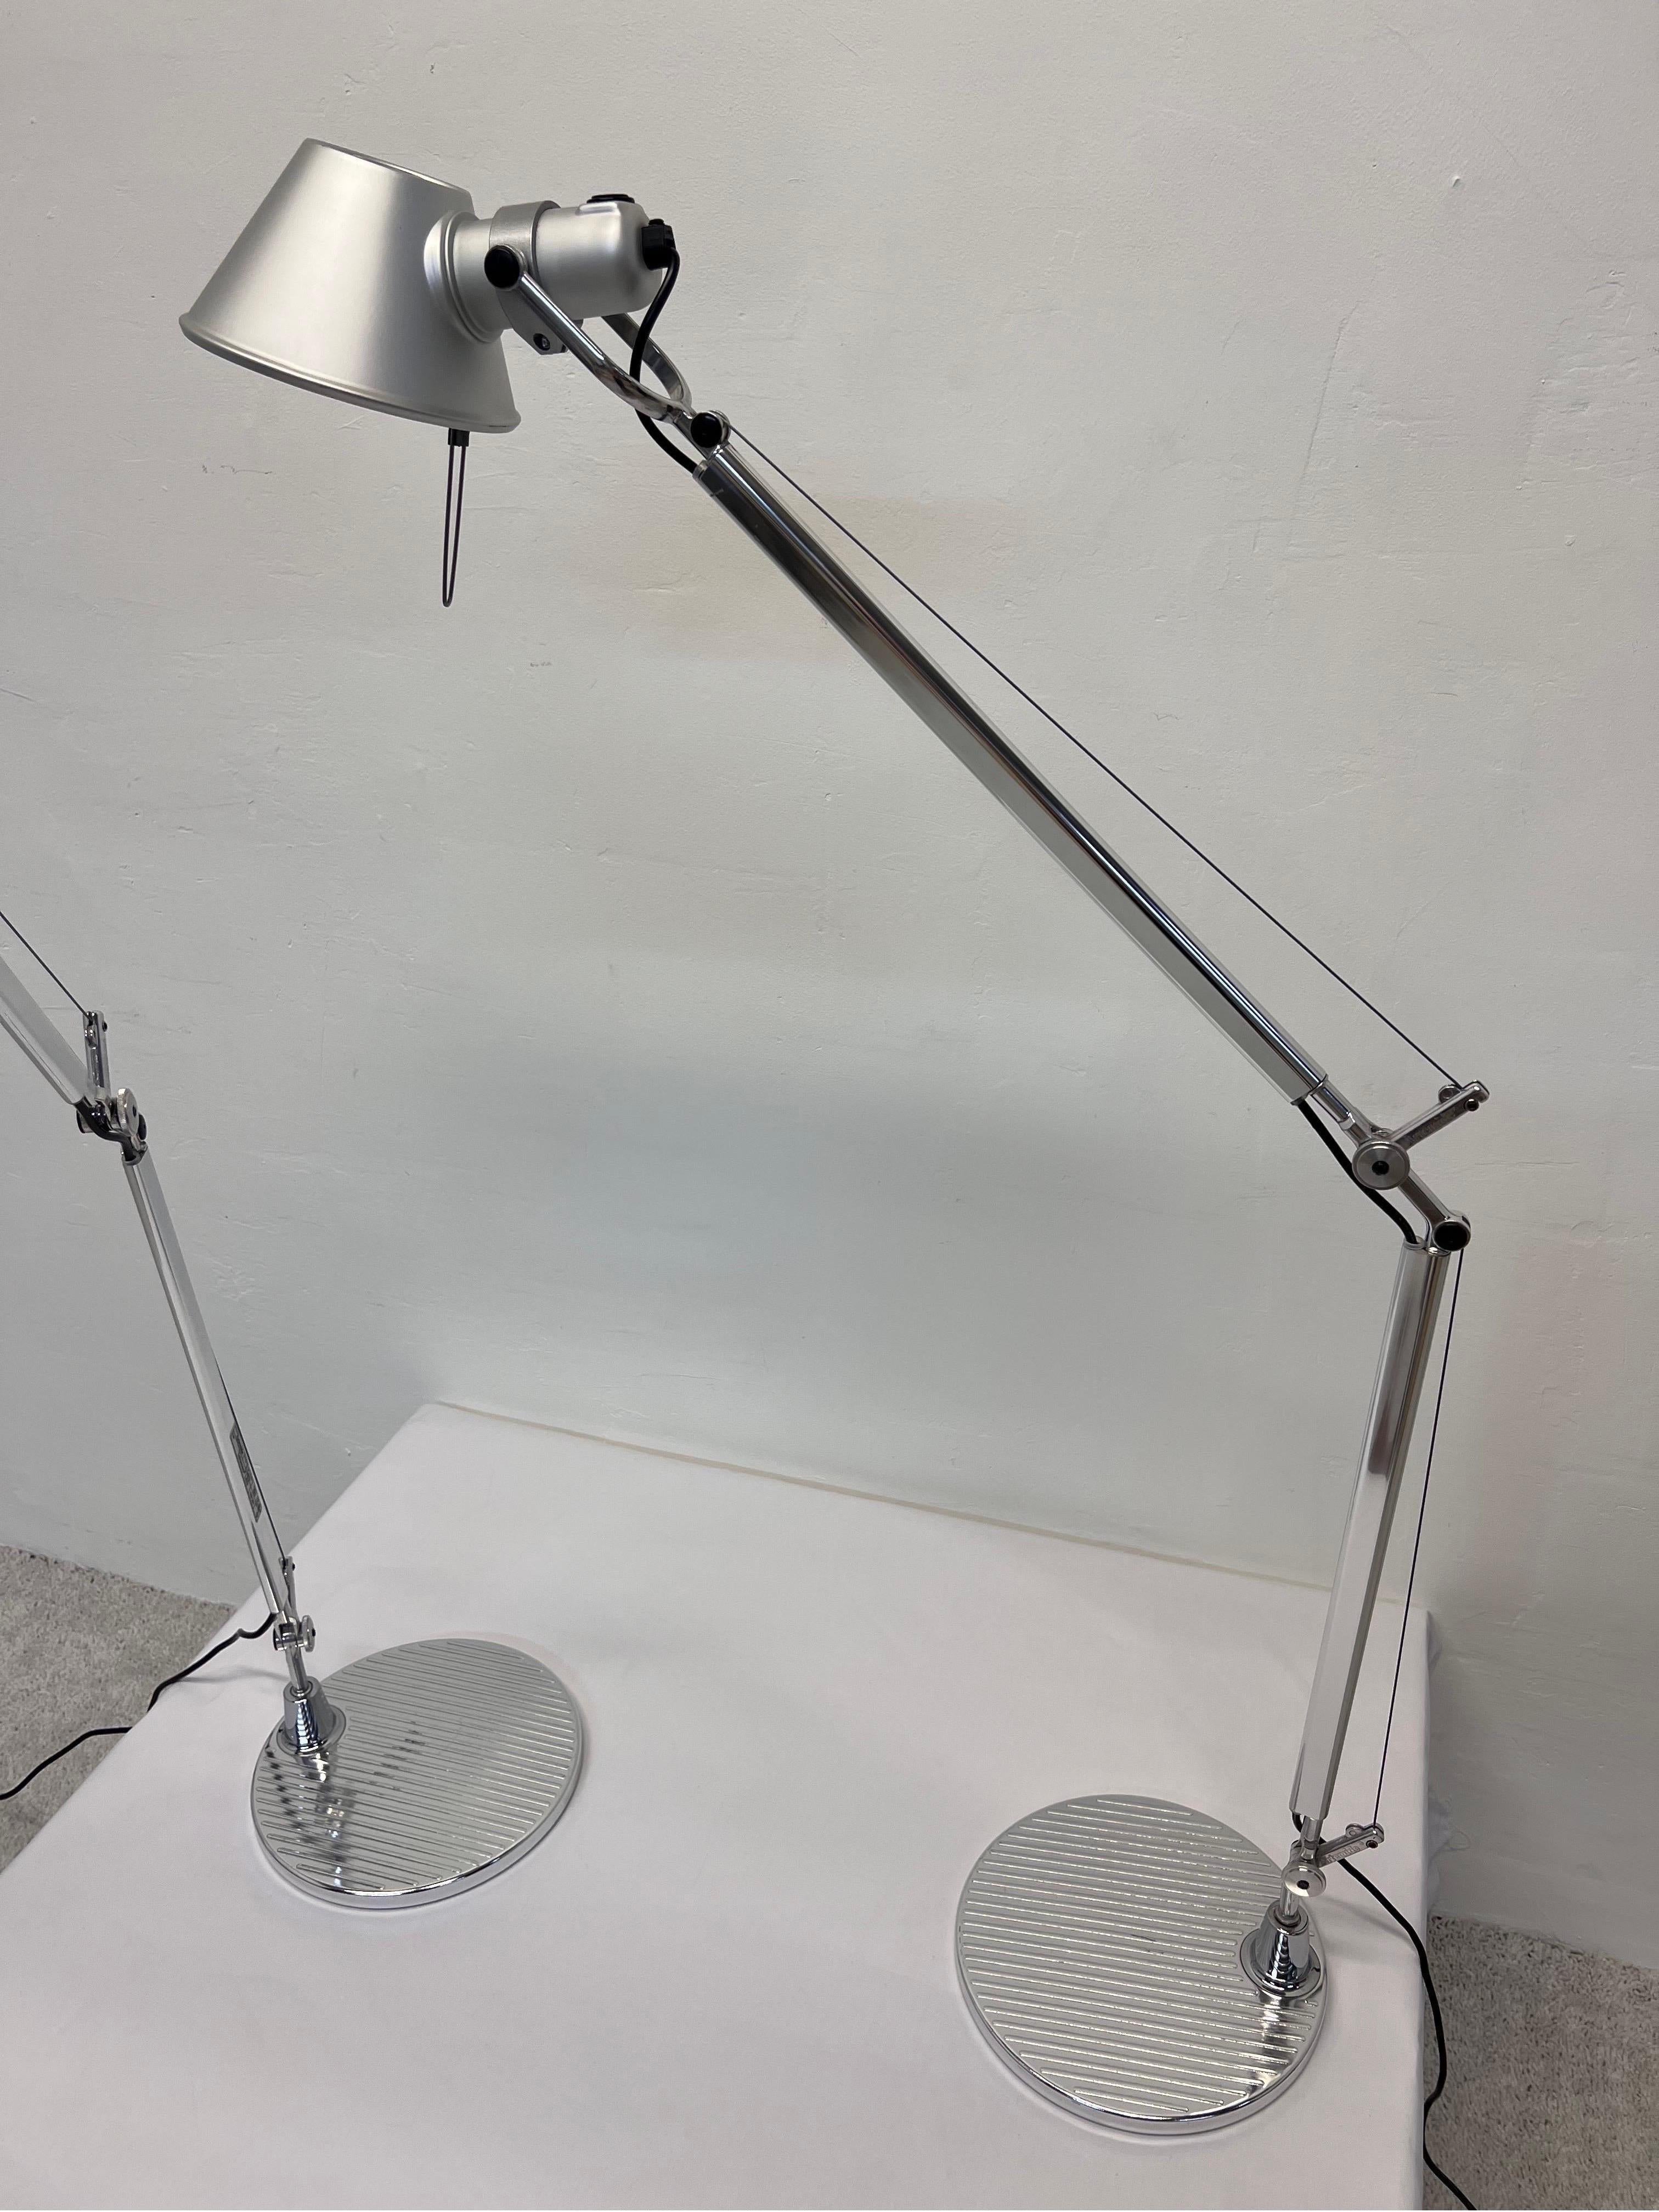 Aluminum Tolomeo LED Desk Lamps by M. De Lucchi and G. Fassina for Artemide, a Pair